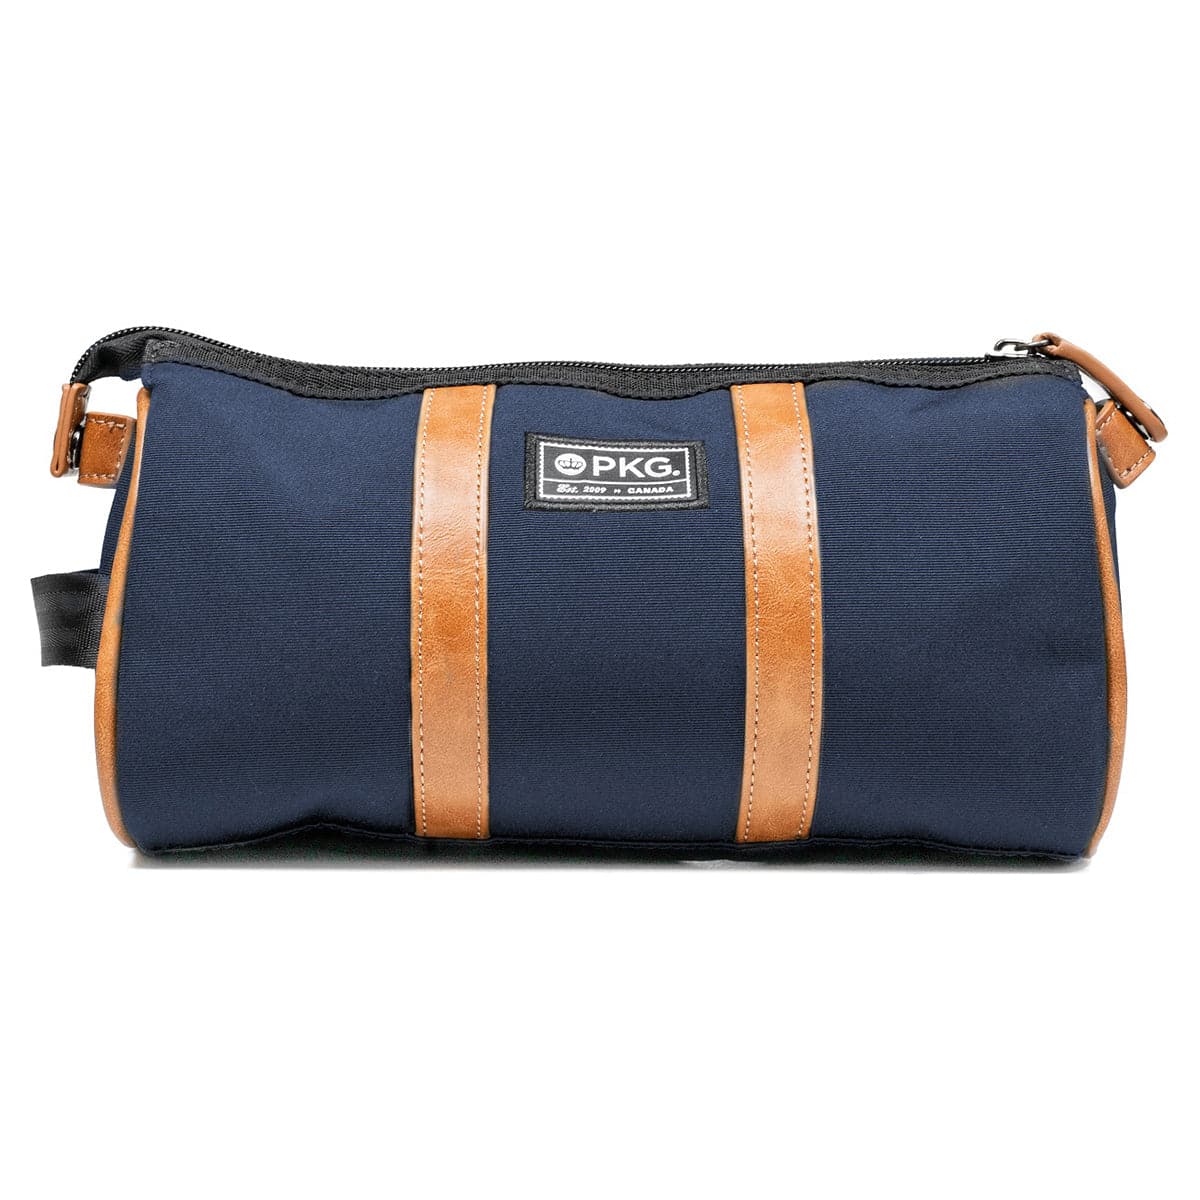 PKG Charlotte Recycled Toiletry Bag